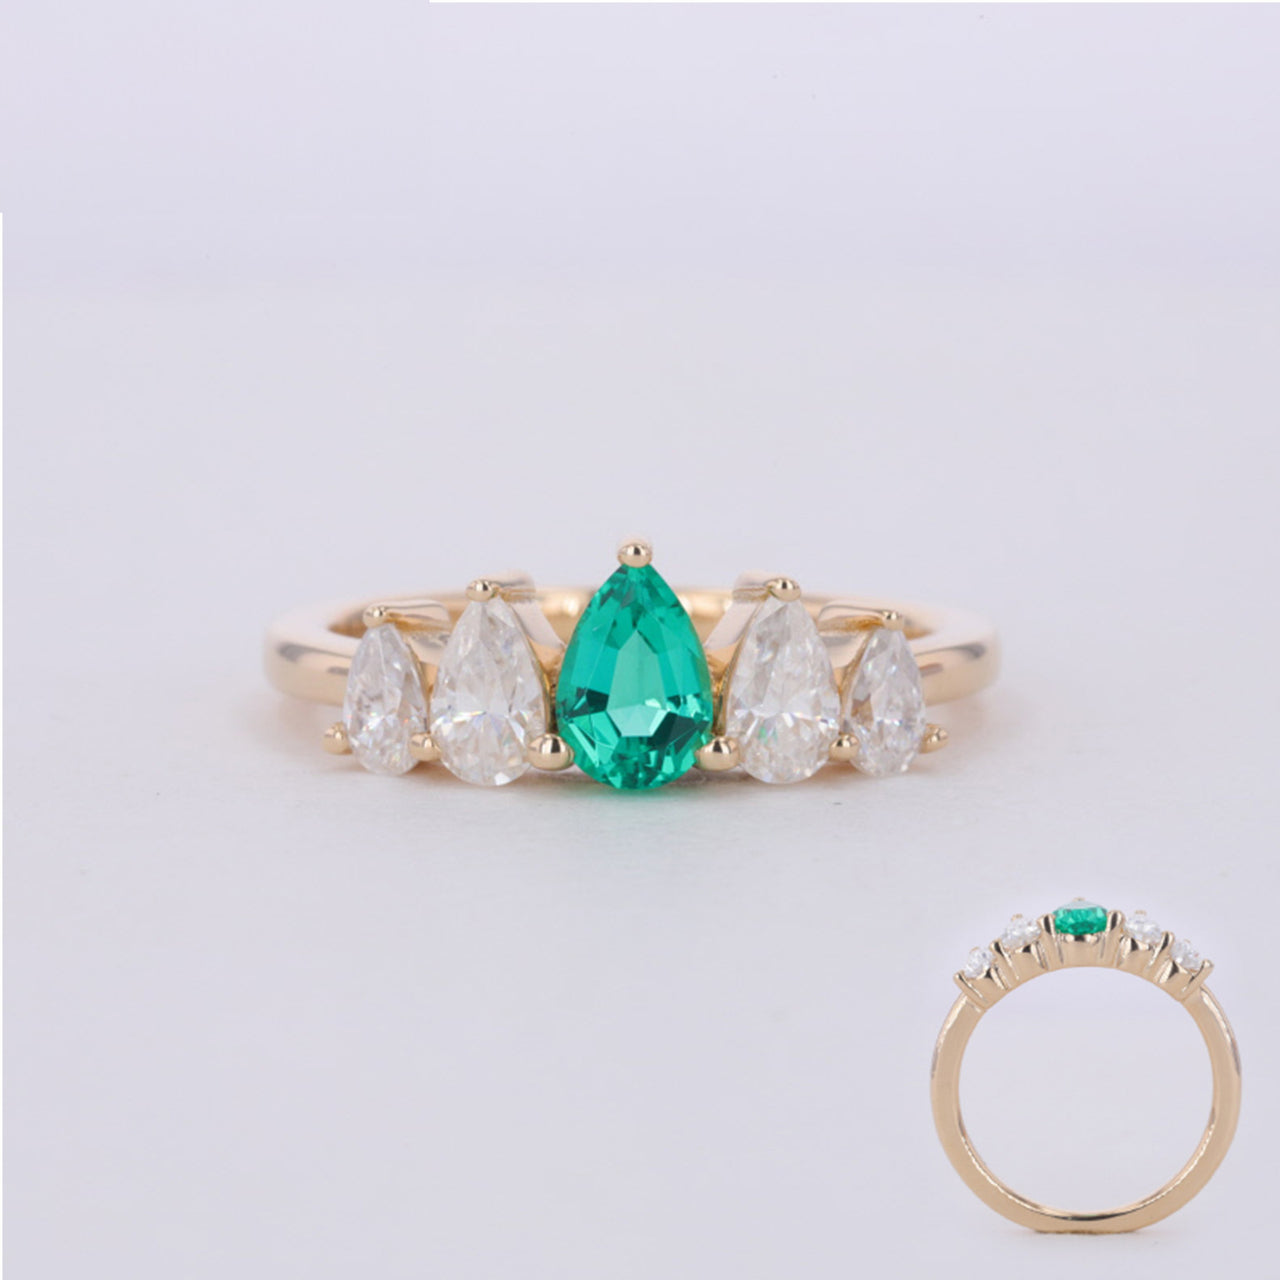 FIVE STONE PEAR CUT LAB GROWN EMERALD GEMSTONE & MOISSANITE RING IN 14K SOLID GOLD